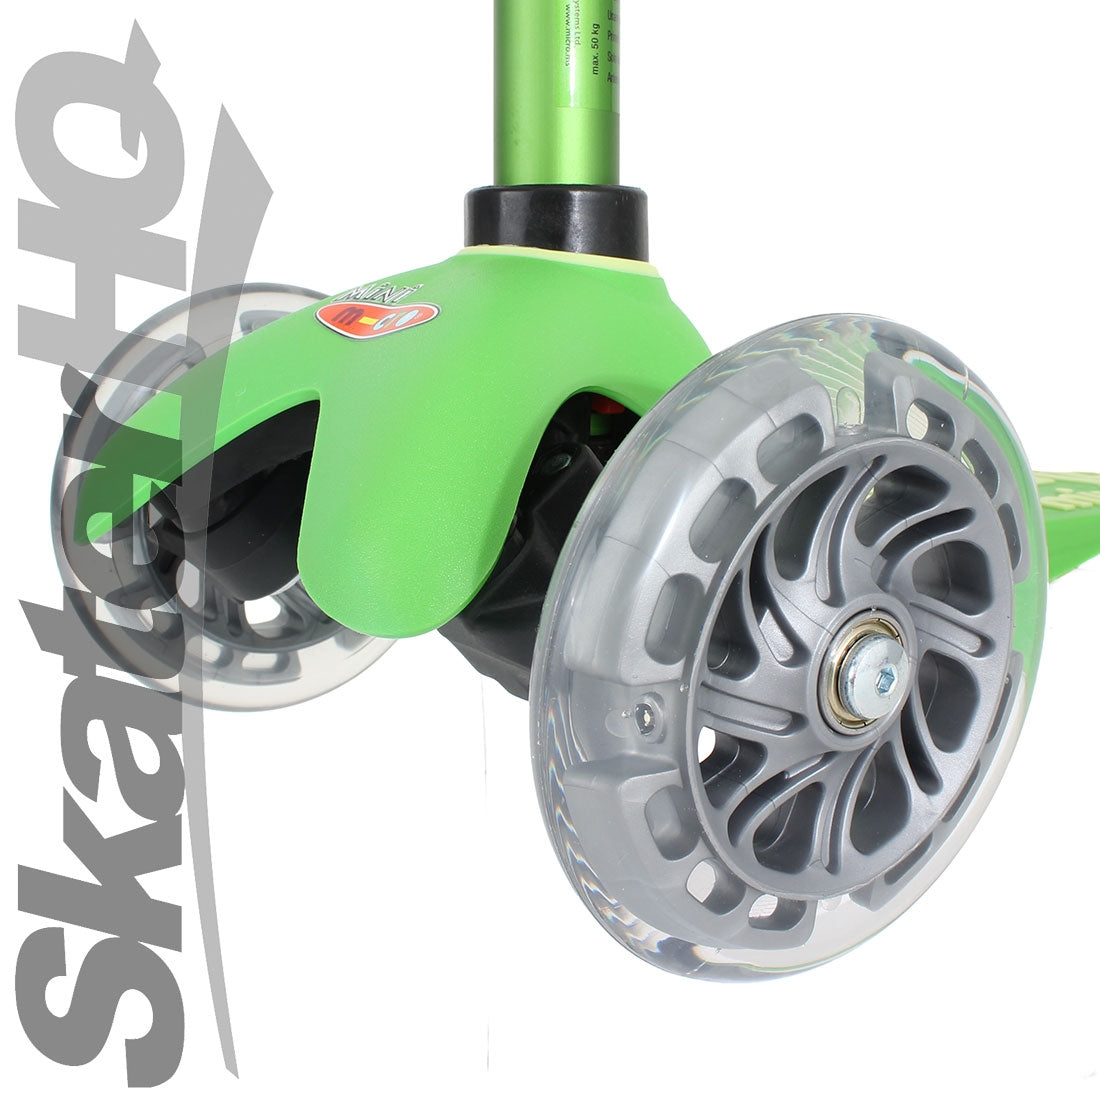 Micro Mini Deluxe LED Scooter - Green Scooter Completes Rec